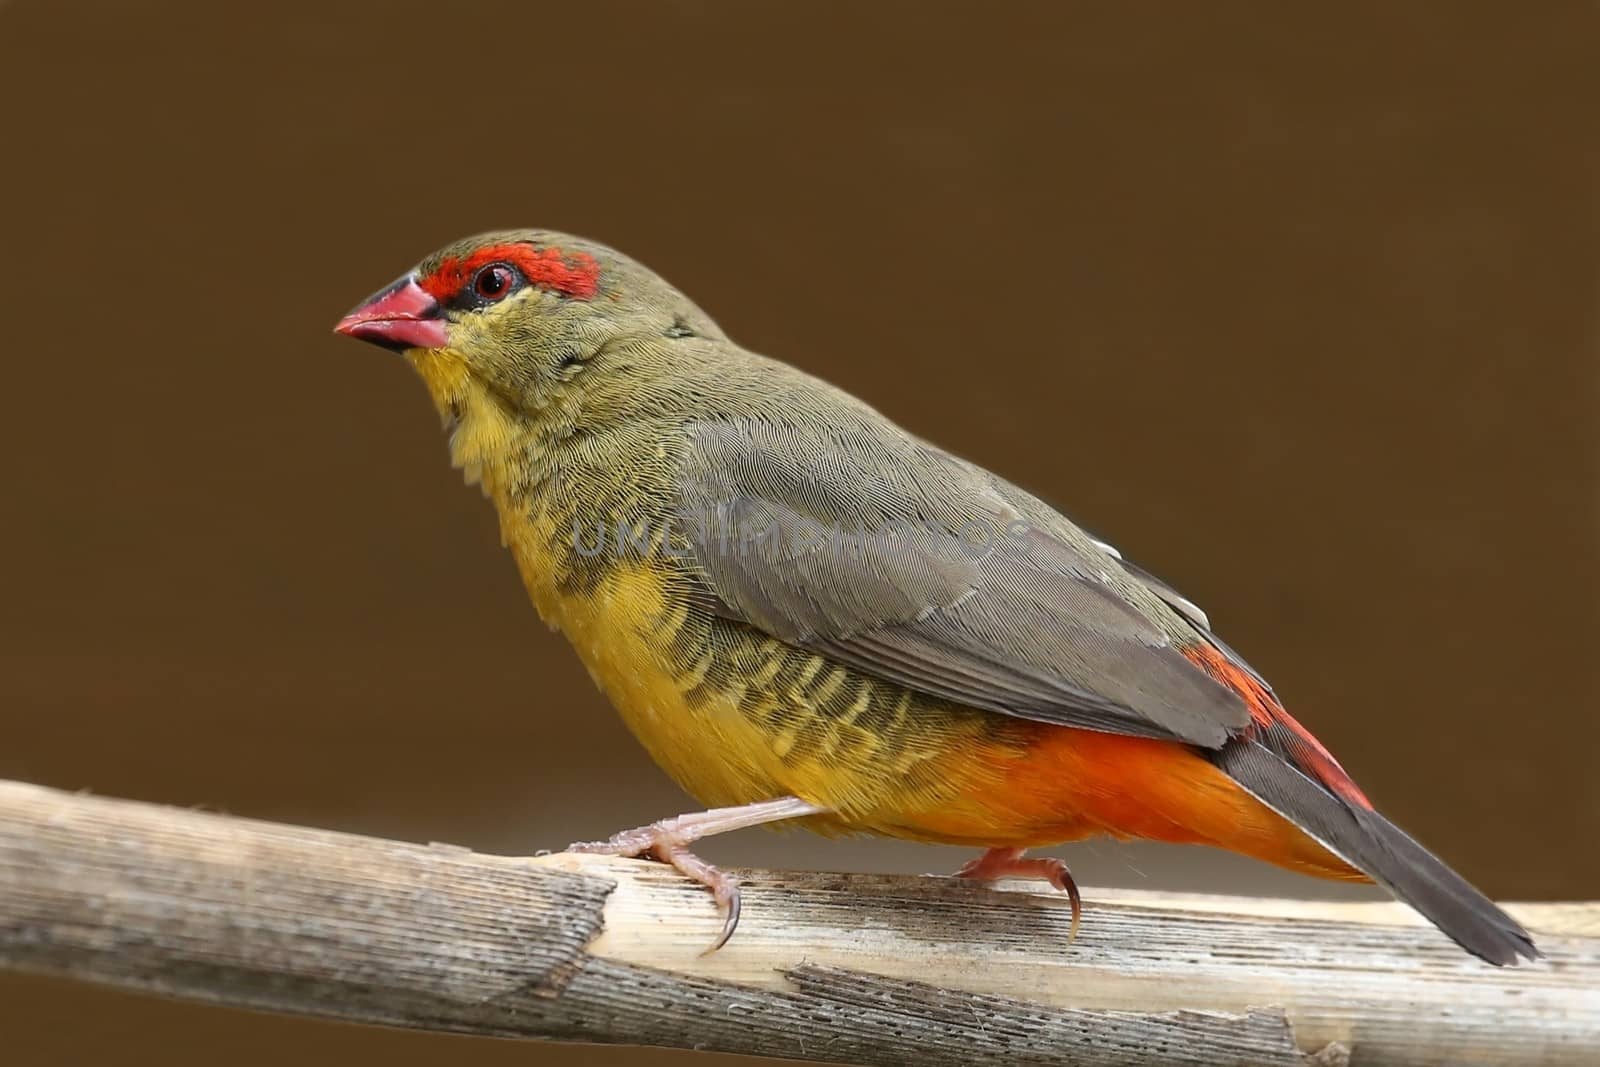 Small and beautiful Orange-Breasted Waxbill bird from Southern Africa